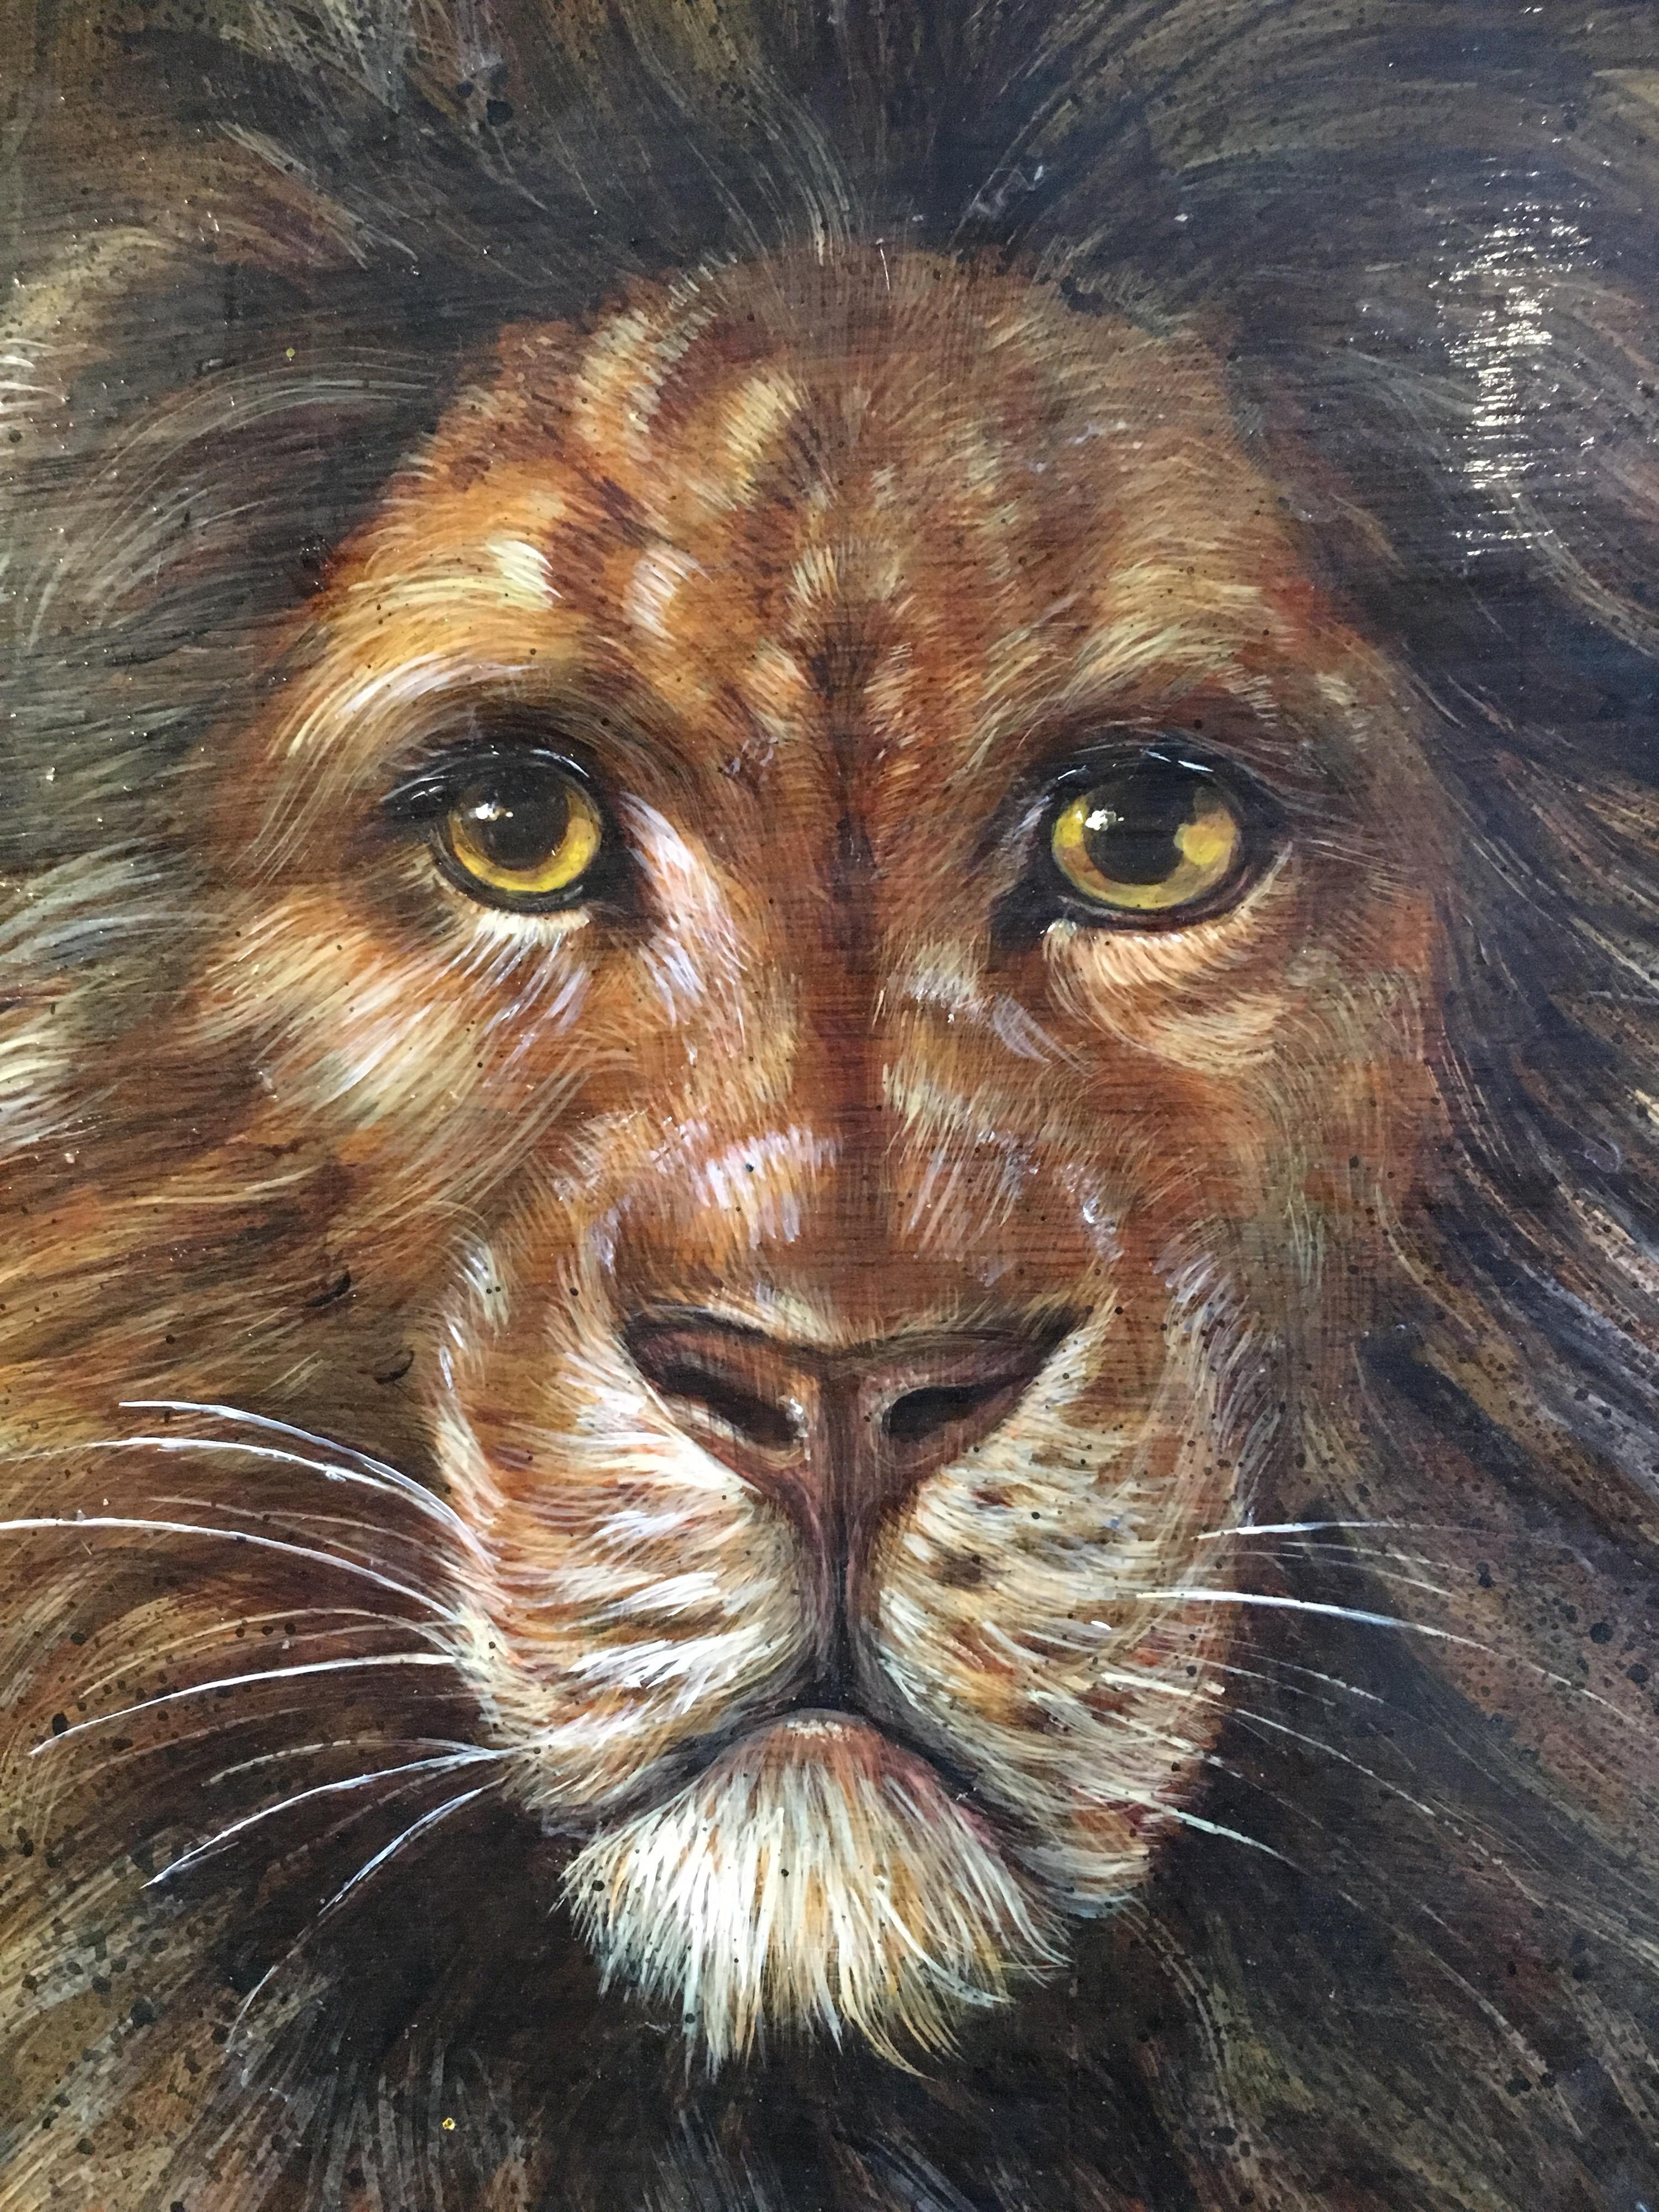 King of the Jungle, Large Impressionist Oil Painting of a Lion 
British School, late 20th Century
Oil painting on board, unframed
Board size: 24 x 36 inches

Powerful impressionist oil painting of a handsome lion.  The tropical leaves over hanging